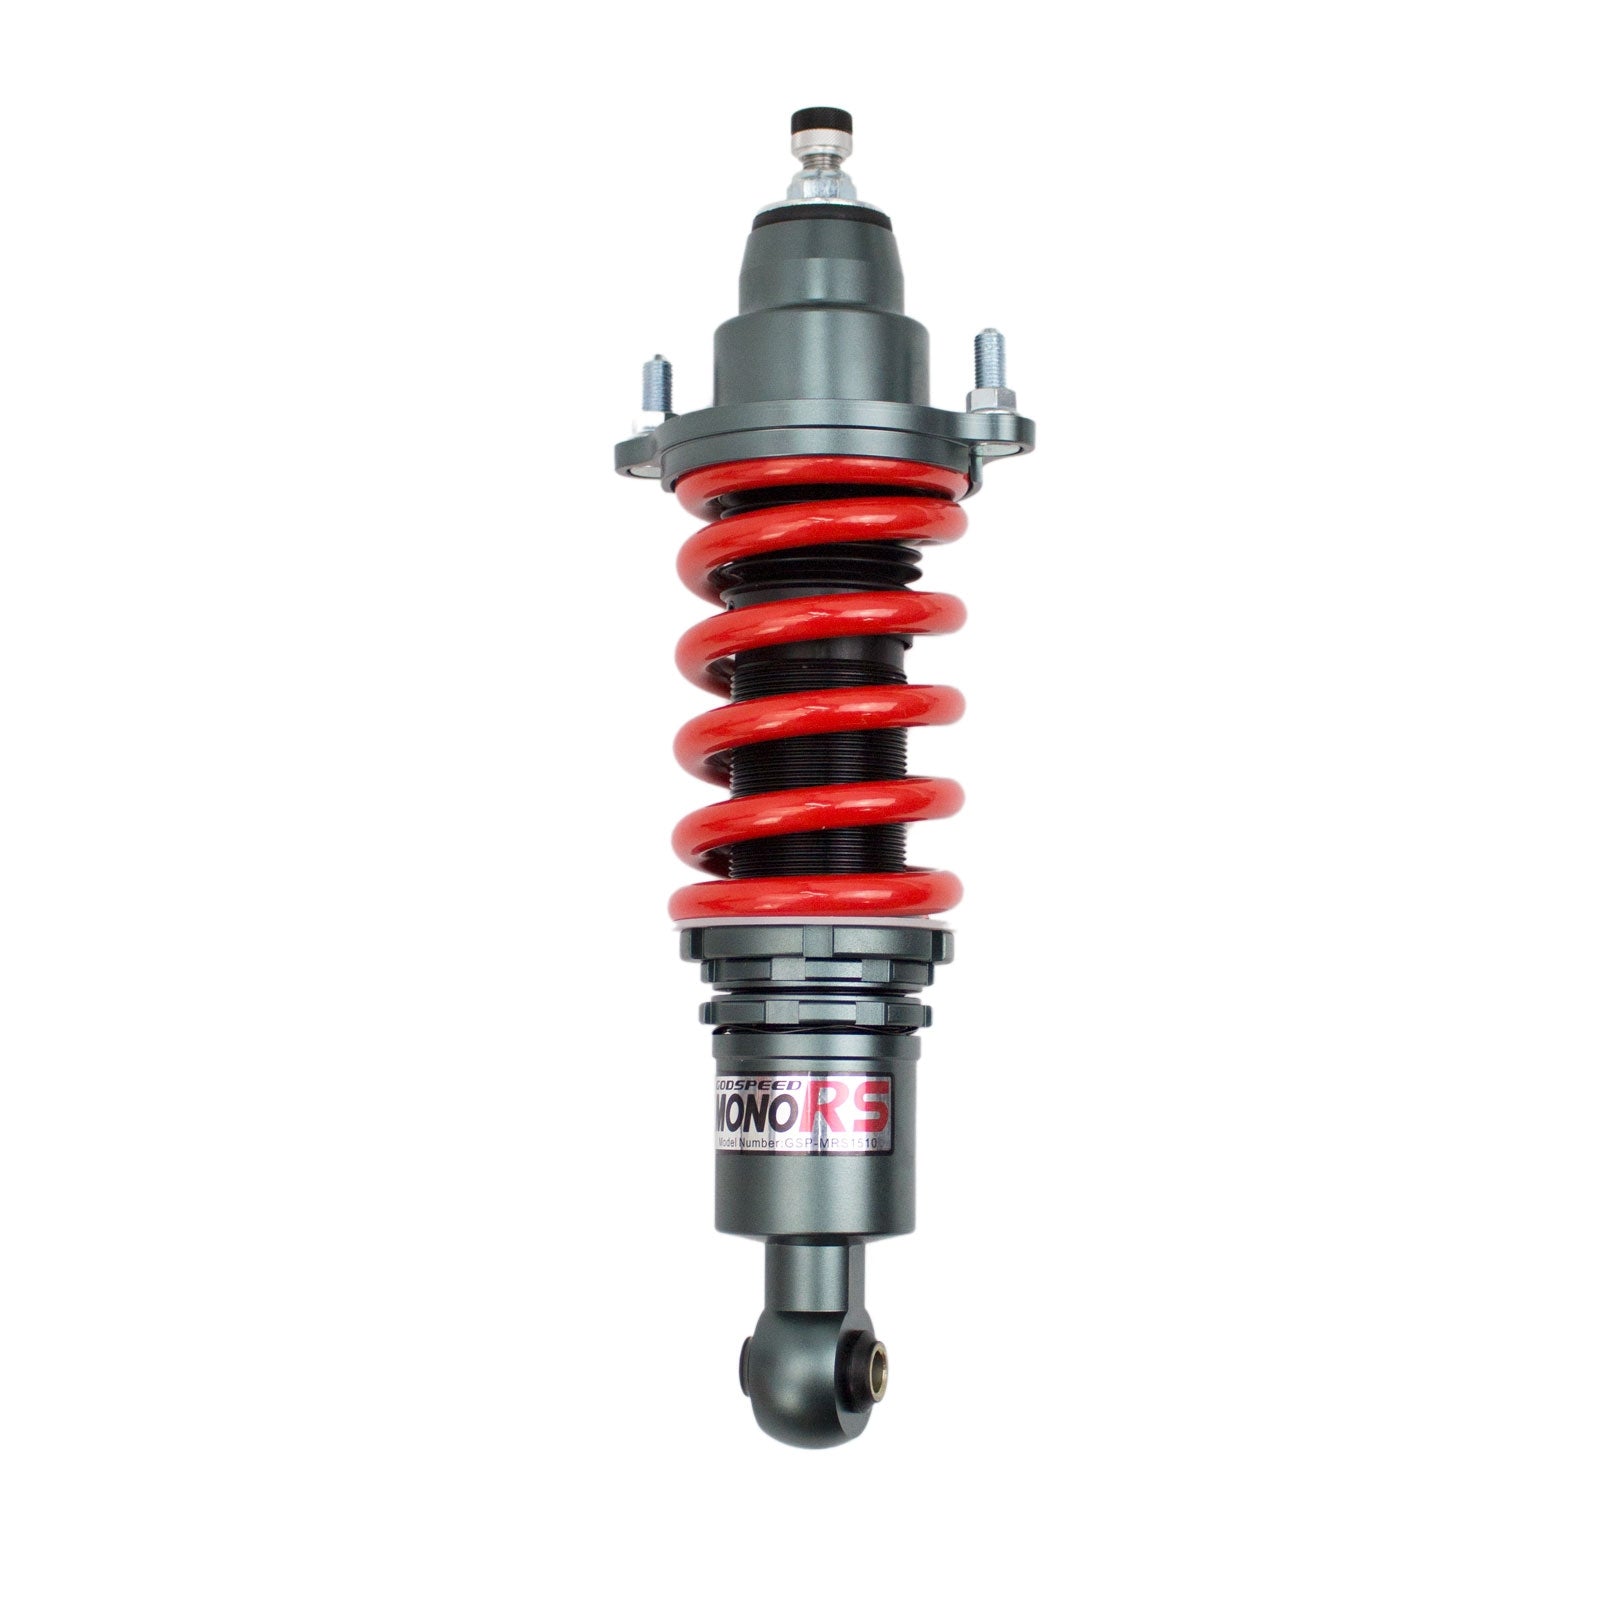 Godspeed MRS1510-C MonoRS Coilover Lowering Kit, 32 Damping Adjustment, Ride Height Adjustable